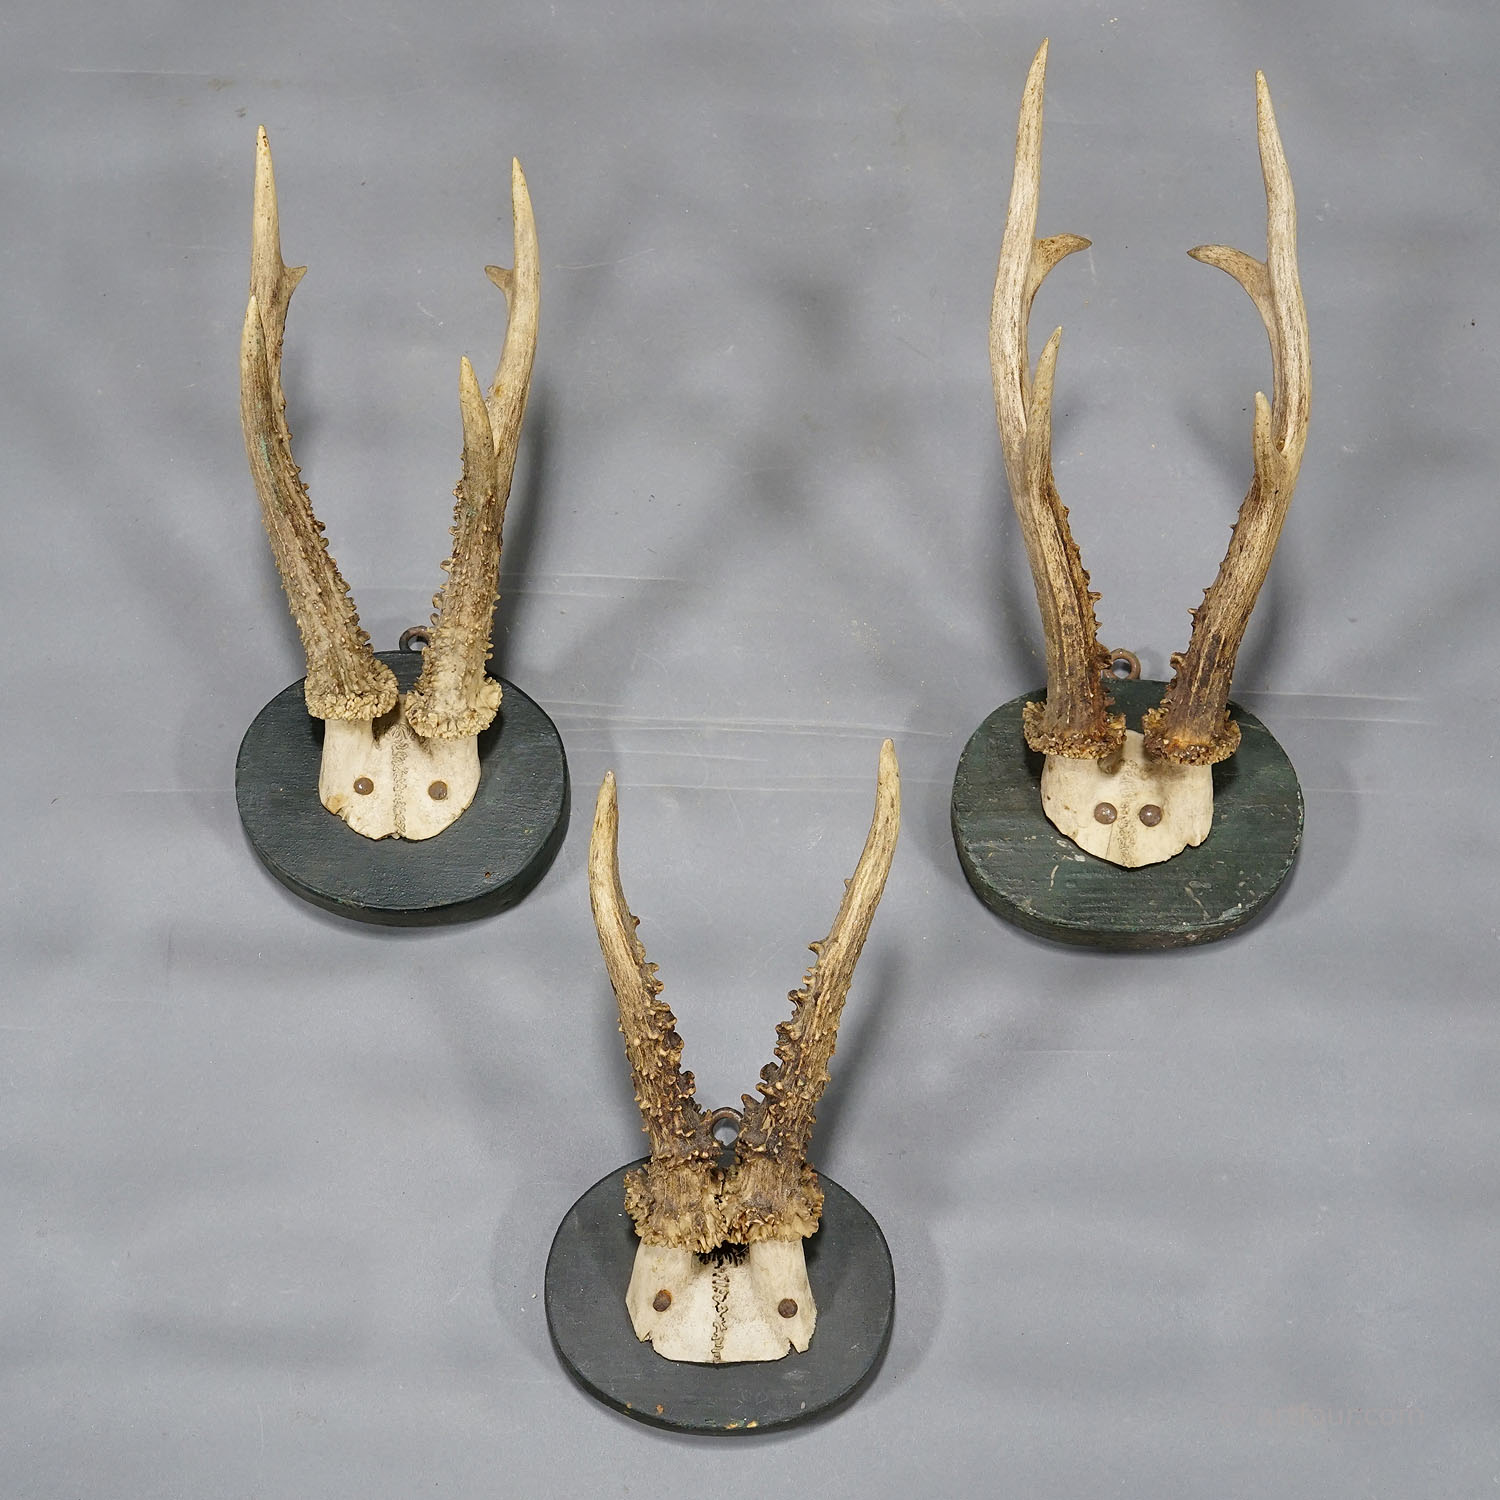 Six Antique Black Forest Deer Trophies on Wooden Plaques Germany 1880s